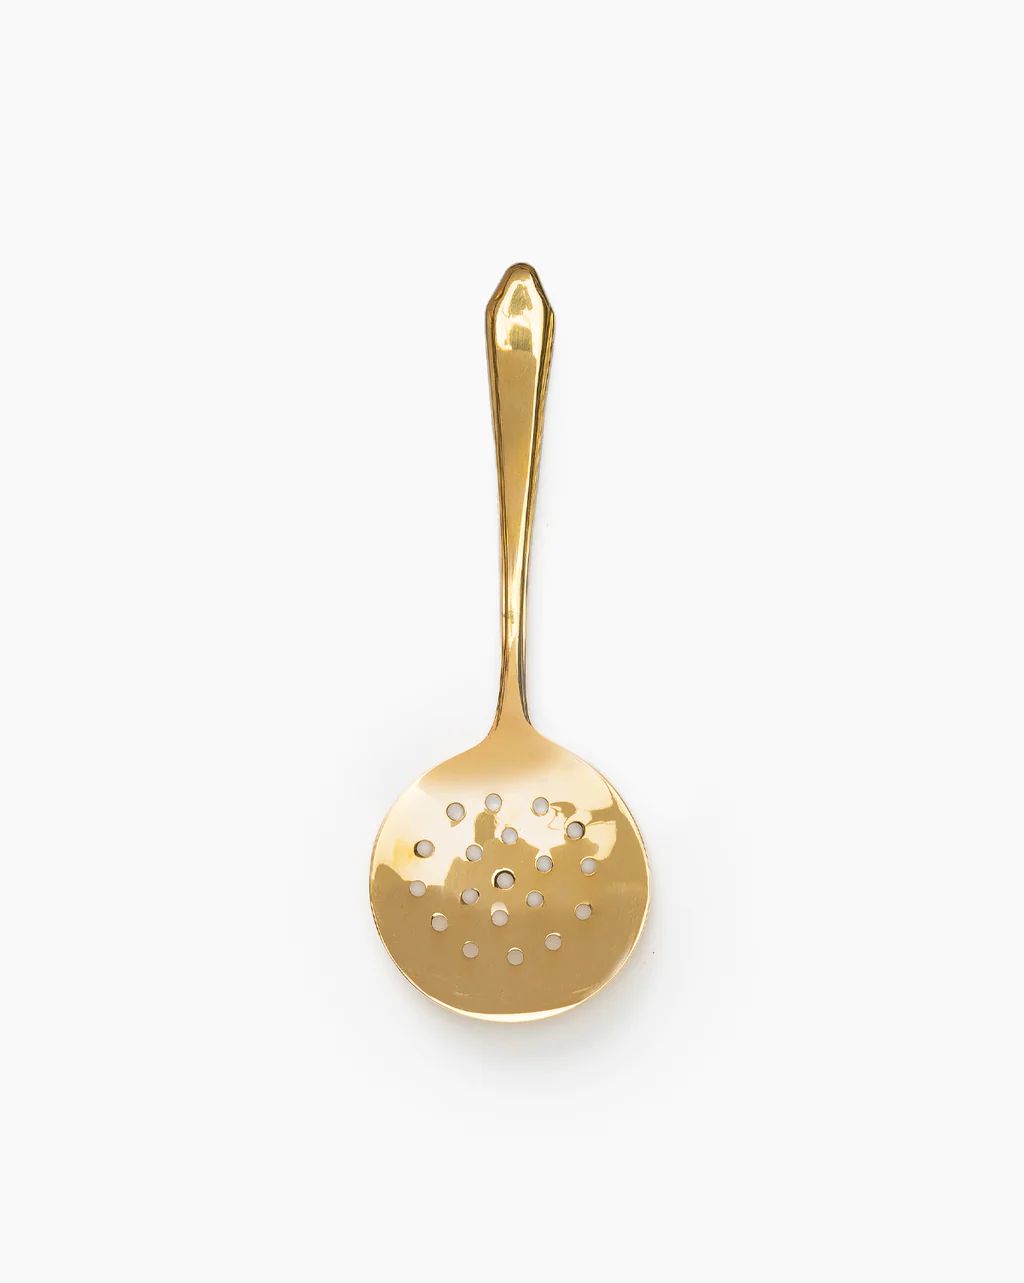 Brass Strainer | McGee & Co.